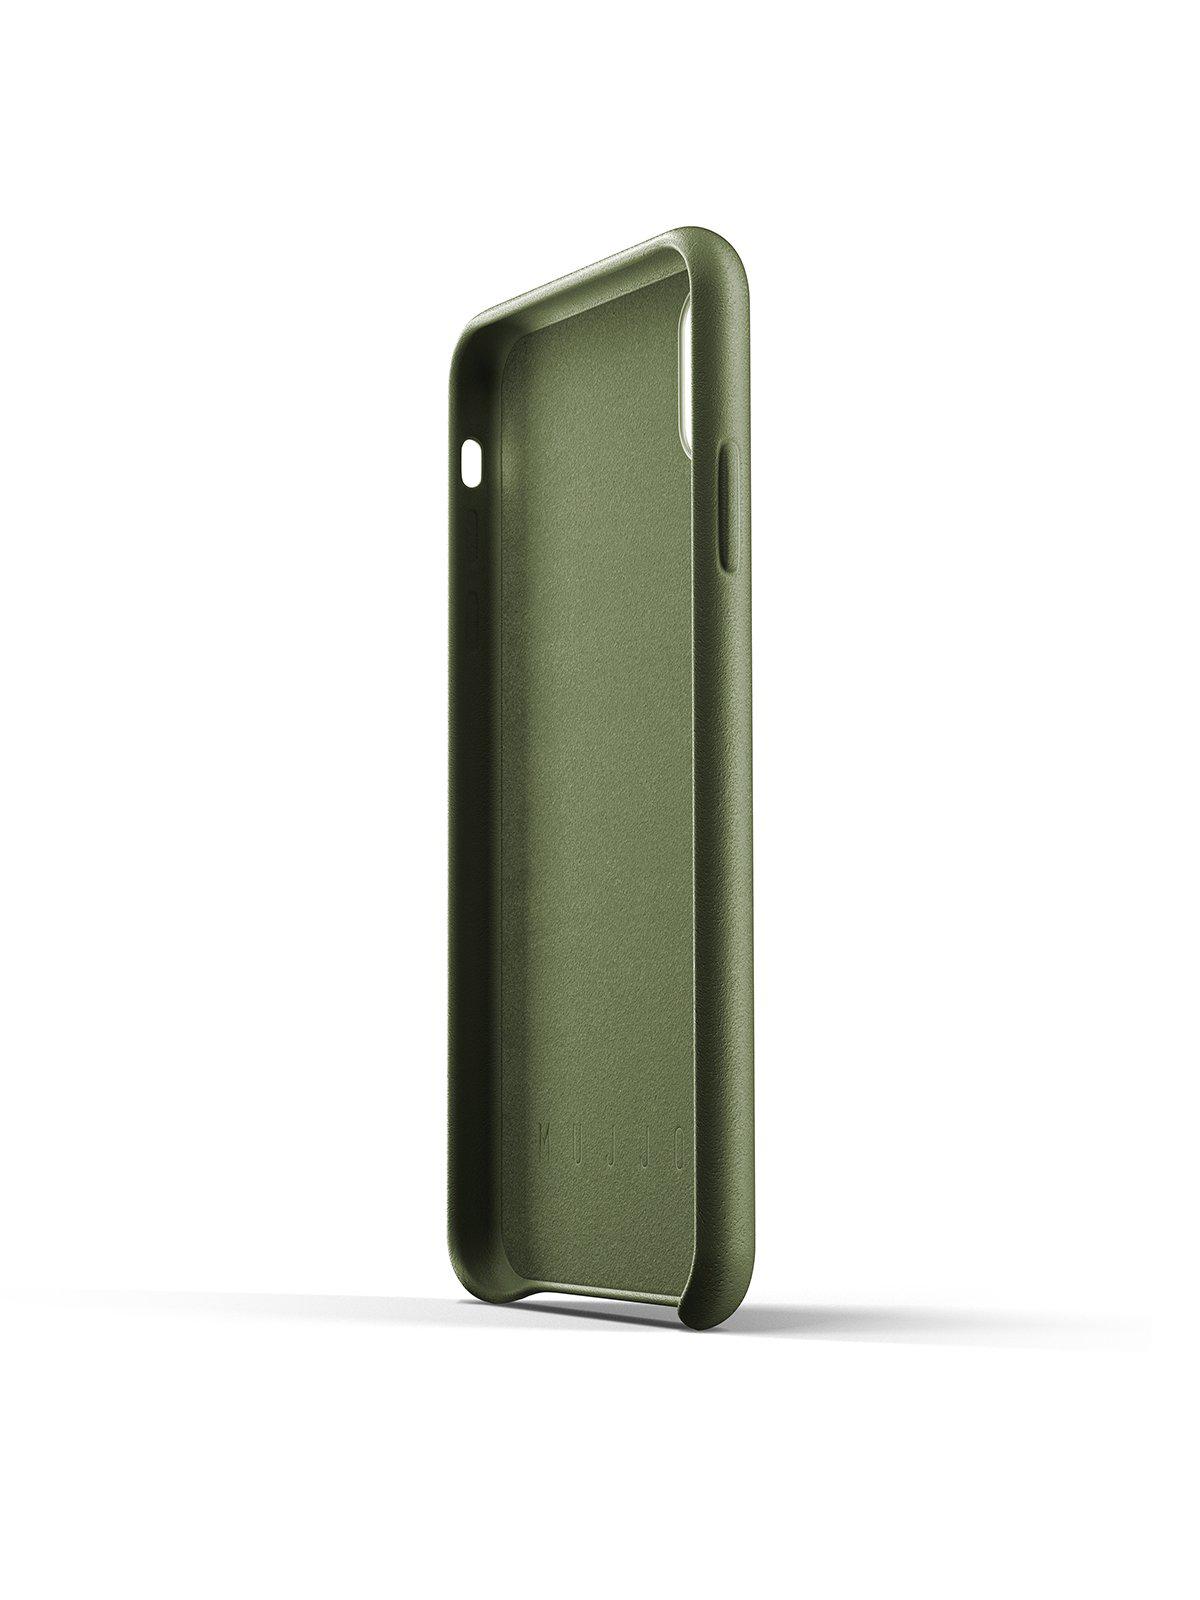 Mujjo Full Leather Wallet Case for iPhone XS Max Olive - MORE by Morello Indonesia